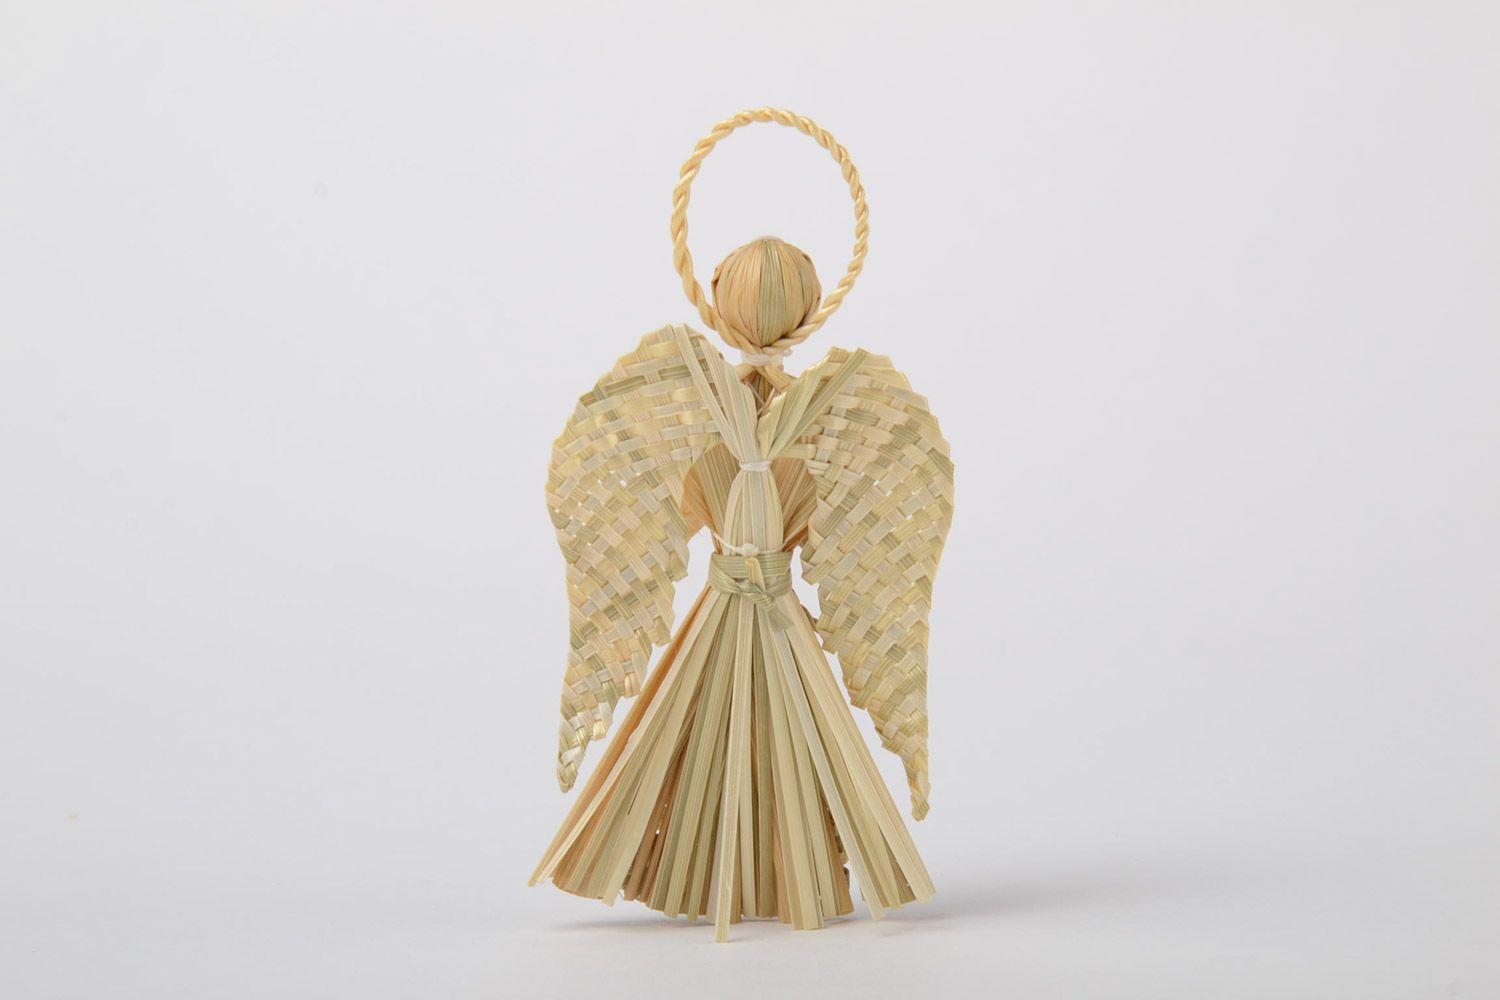 Small handmade wall hanging figurine of guardian angel woven of natural straw photo 3